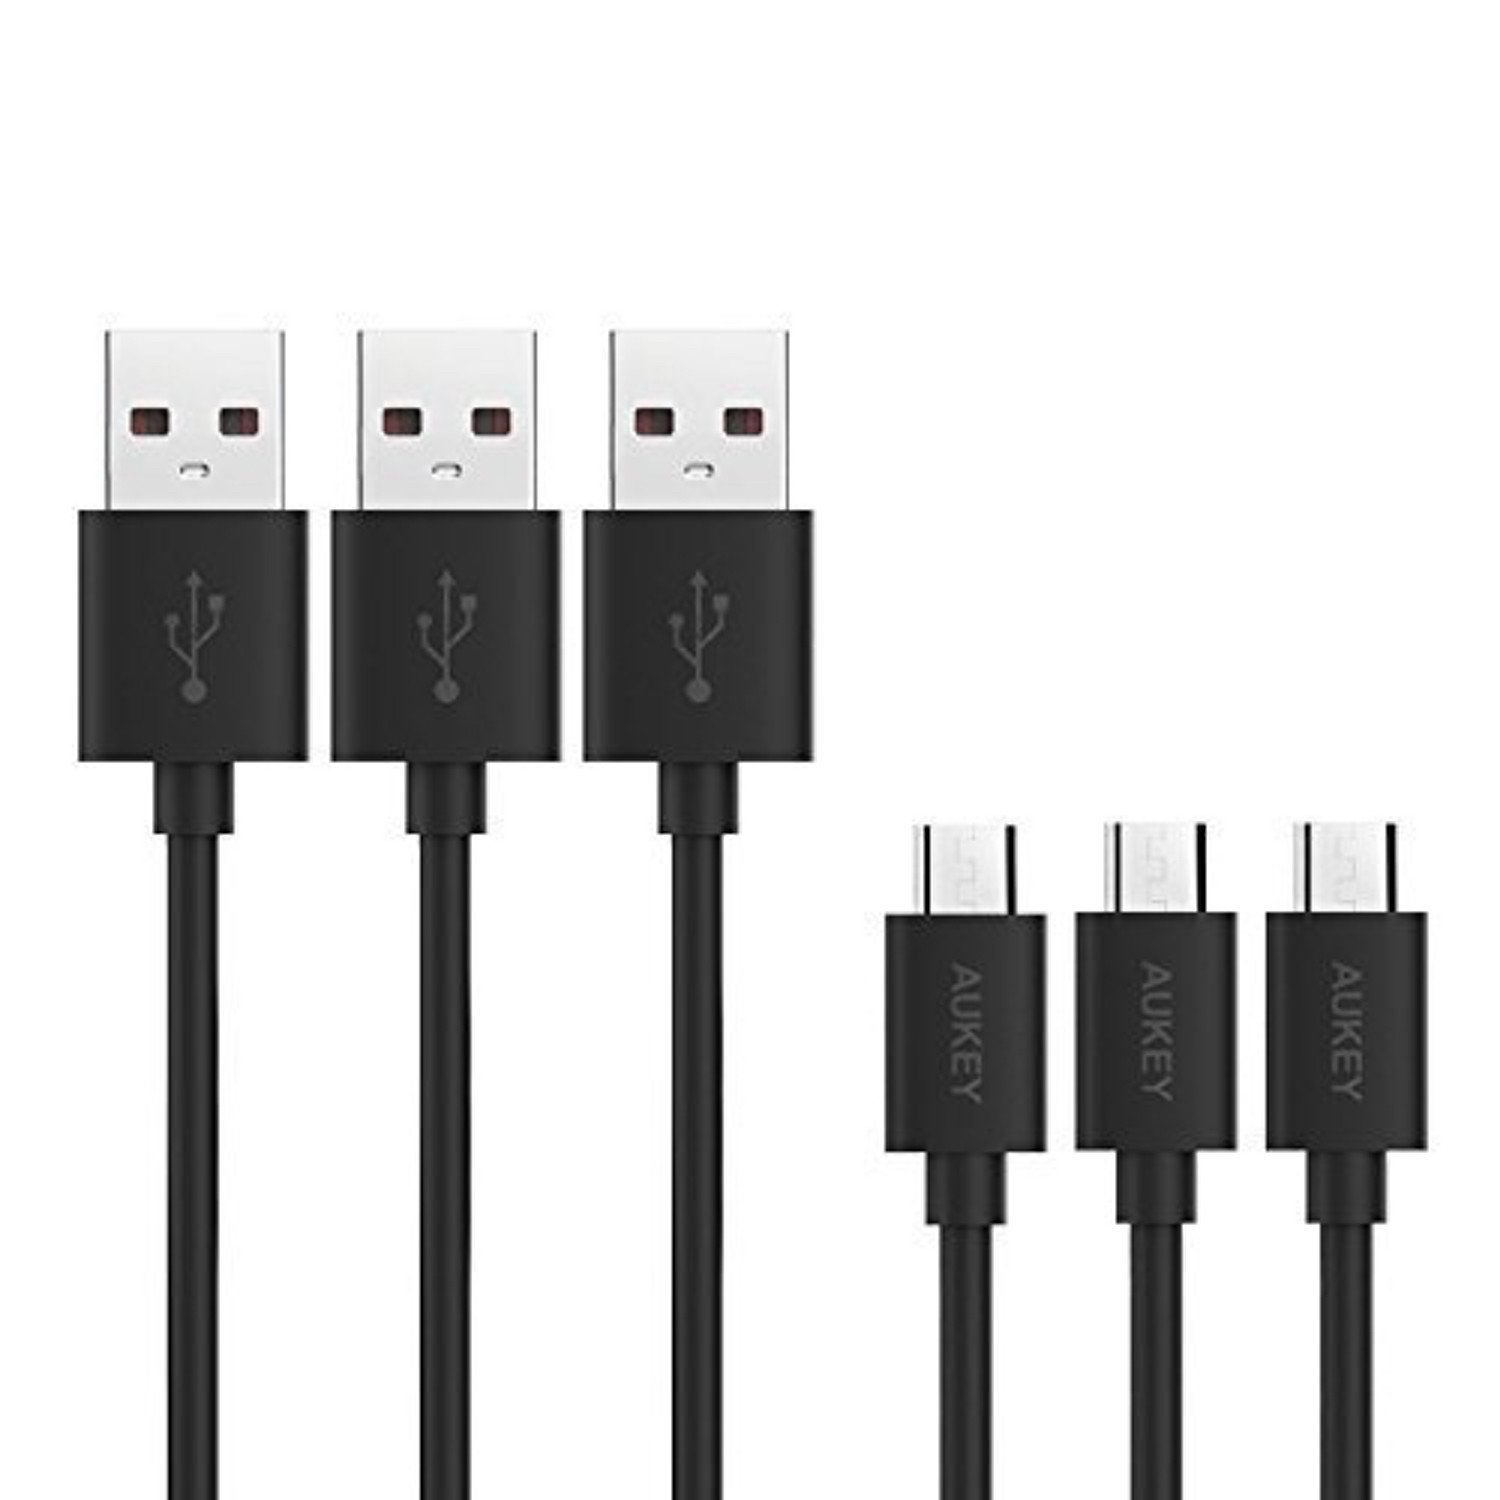 CB-D10 20AWG QUalcomm Quick Charge 2.03.0 Micro USB Cable (3Pack)_1.jpg